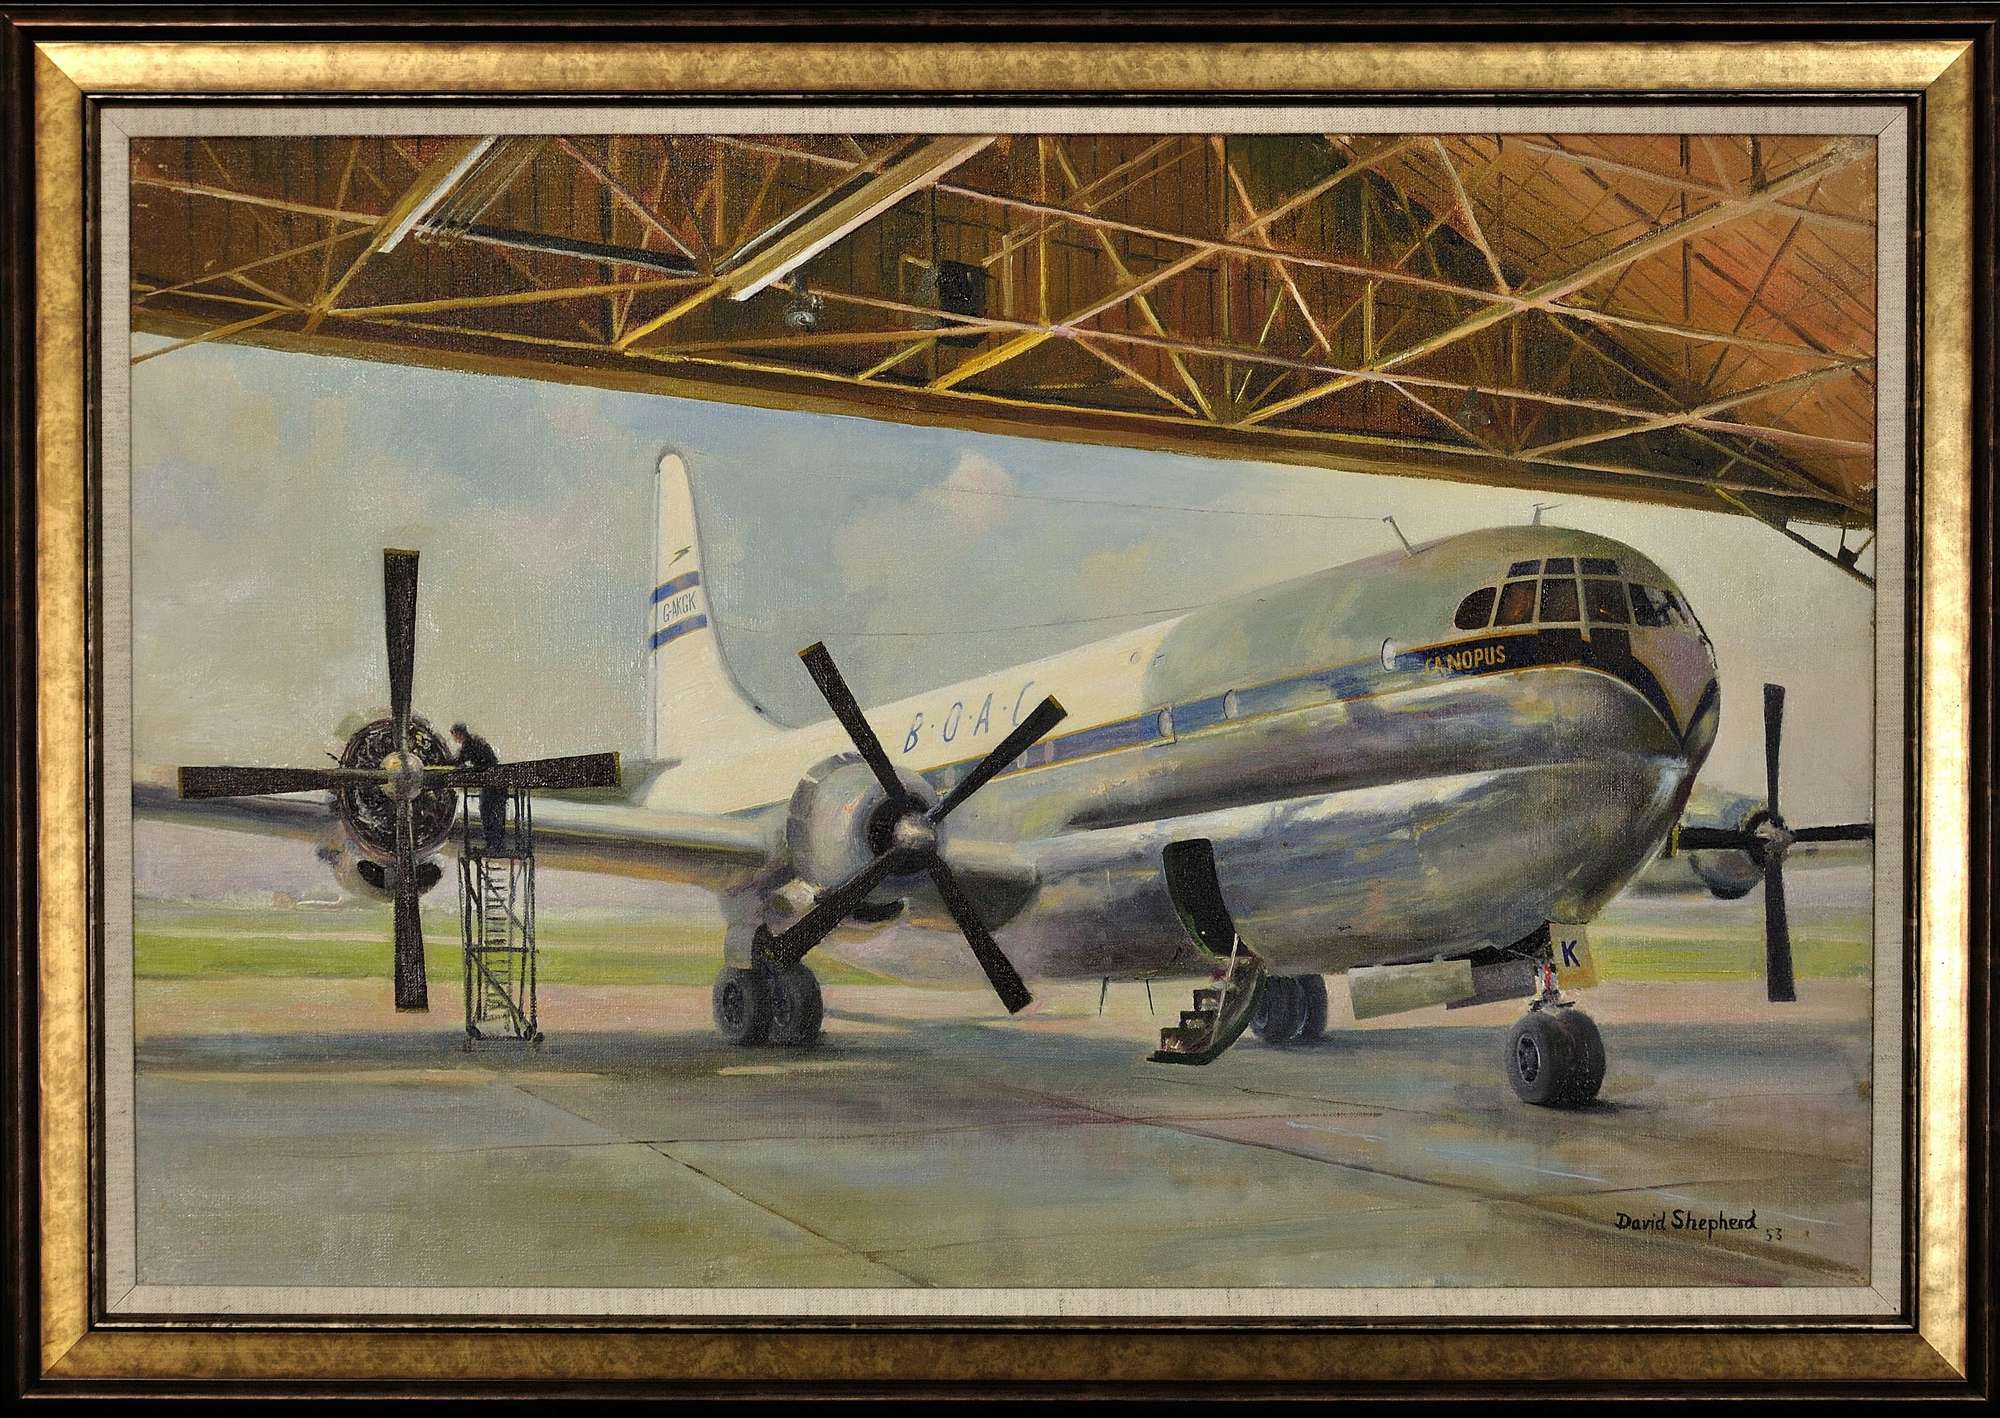 David Shepherd 1931-2017. Giant Refreshed,1953. Boac Boeing Stratocruiser. Oil On Canvas